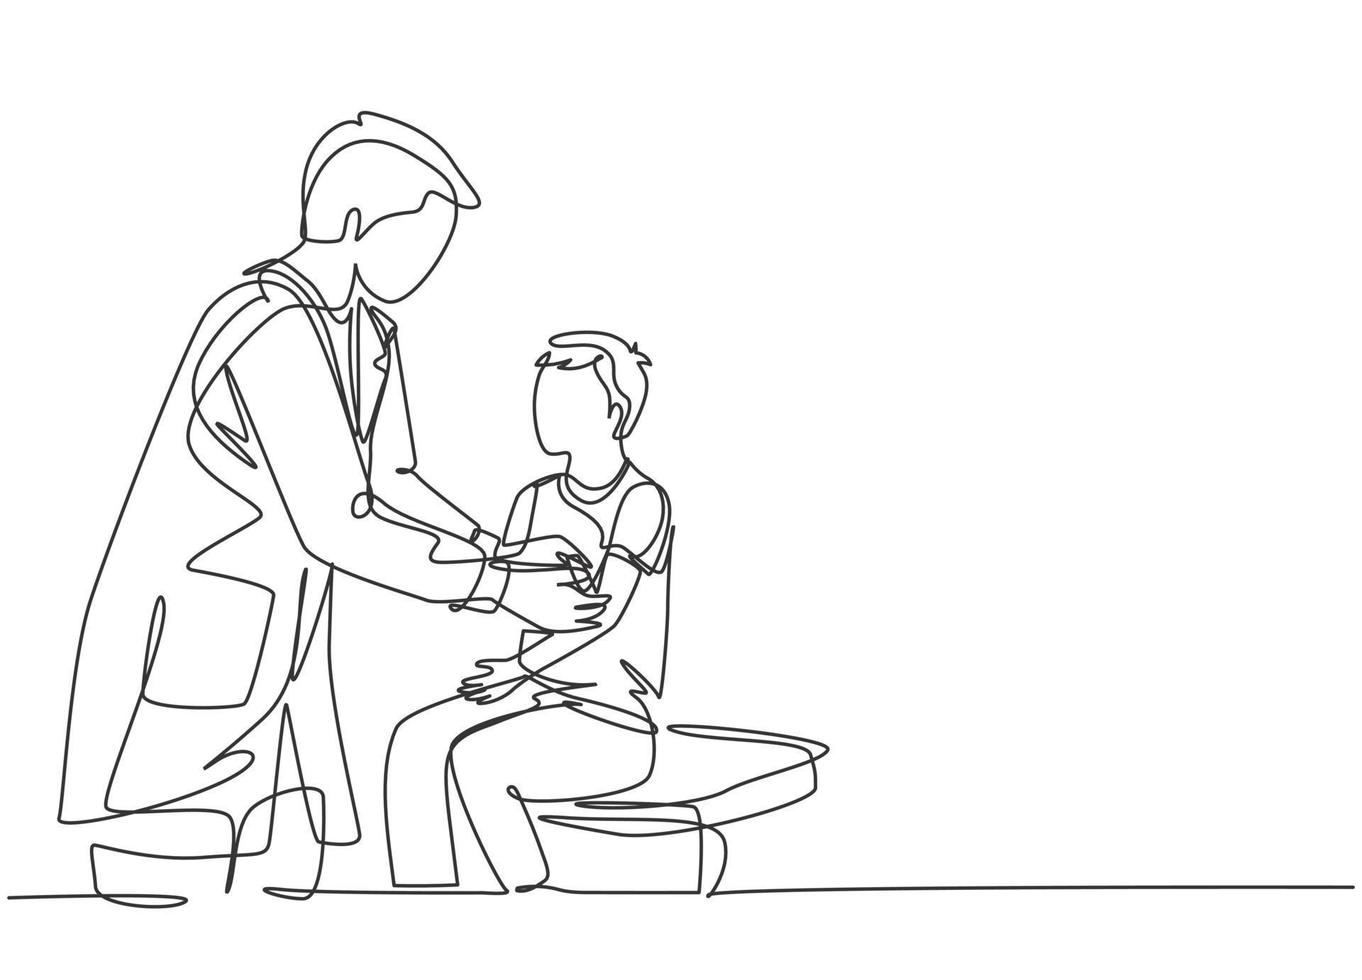 One single line drawing of male doctor giving medical aid treatment by attaching a bandage to injured little boy patient. Medical treatment concept continuous line draw design vector illustration